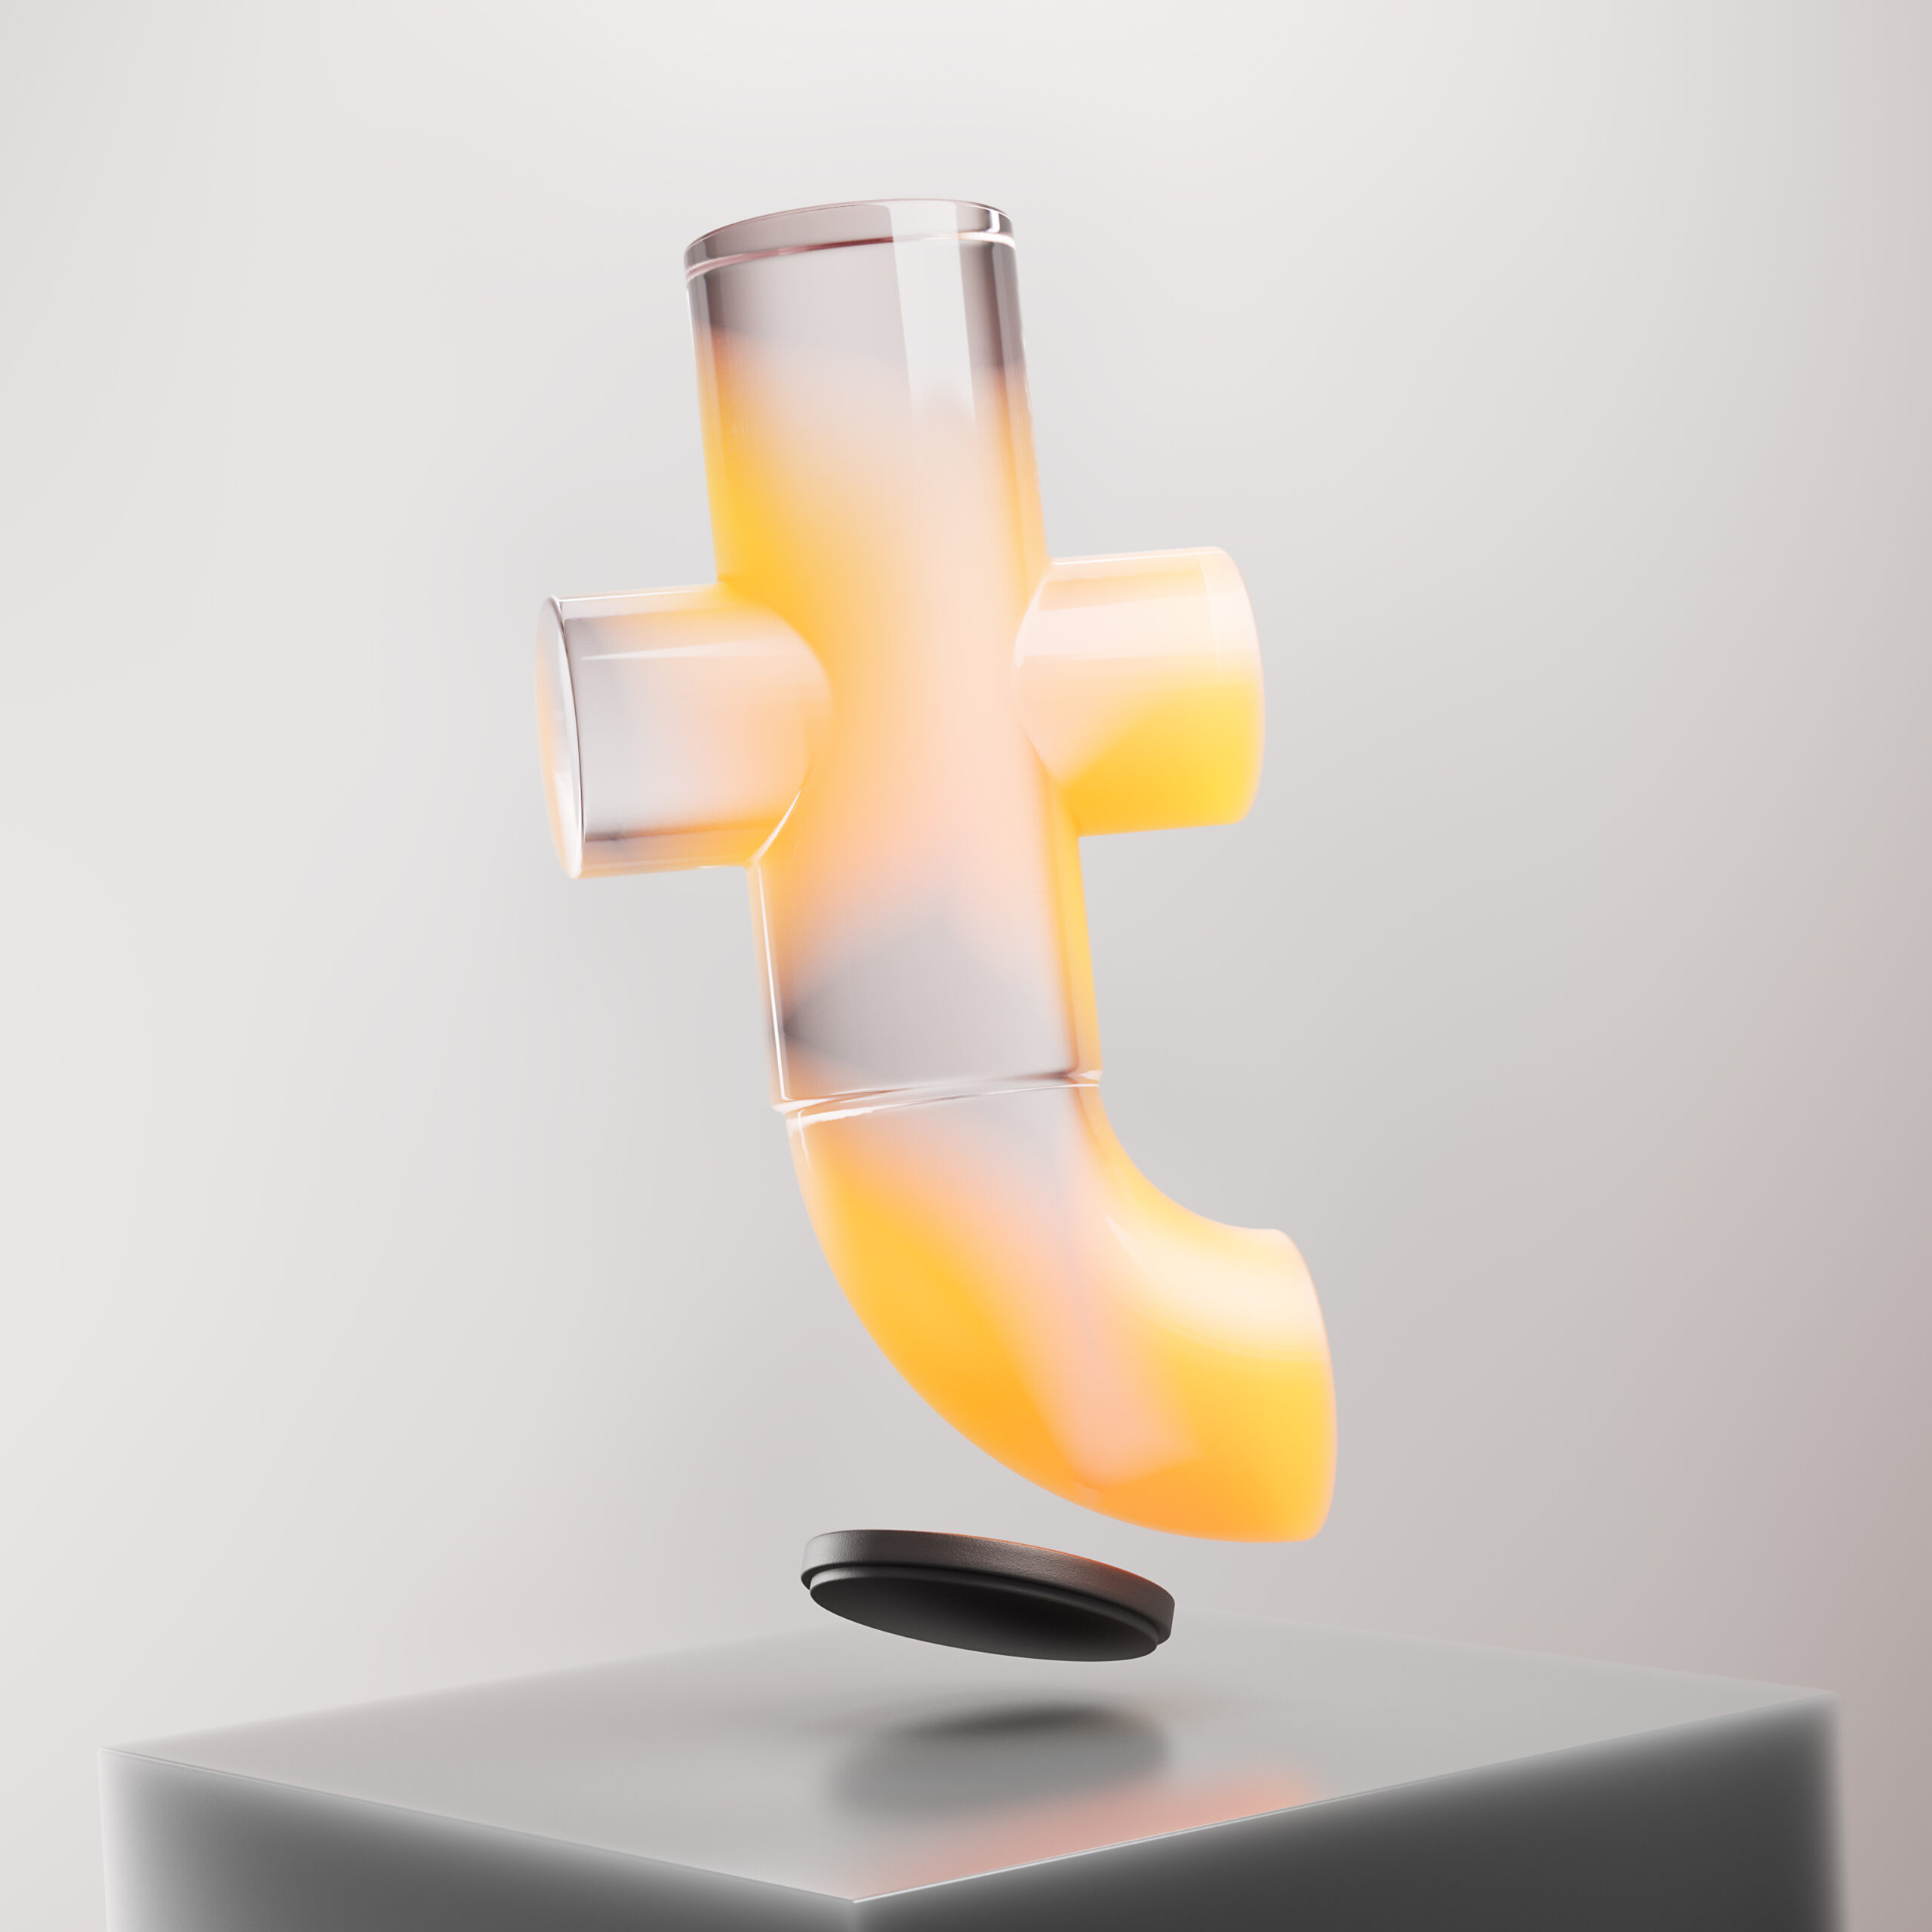 3D rendering of the letter T by Marco Bach